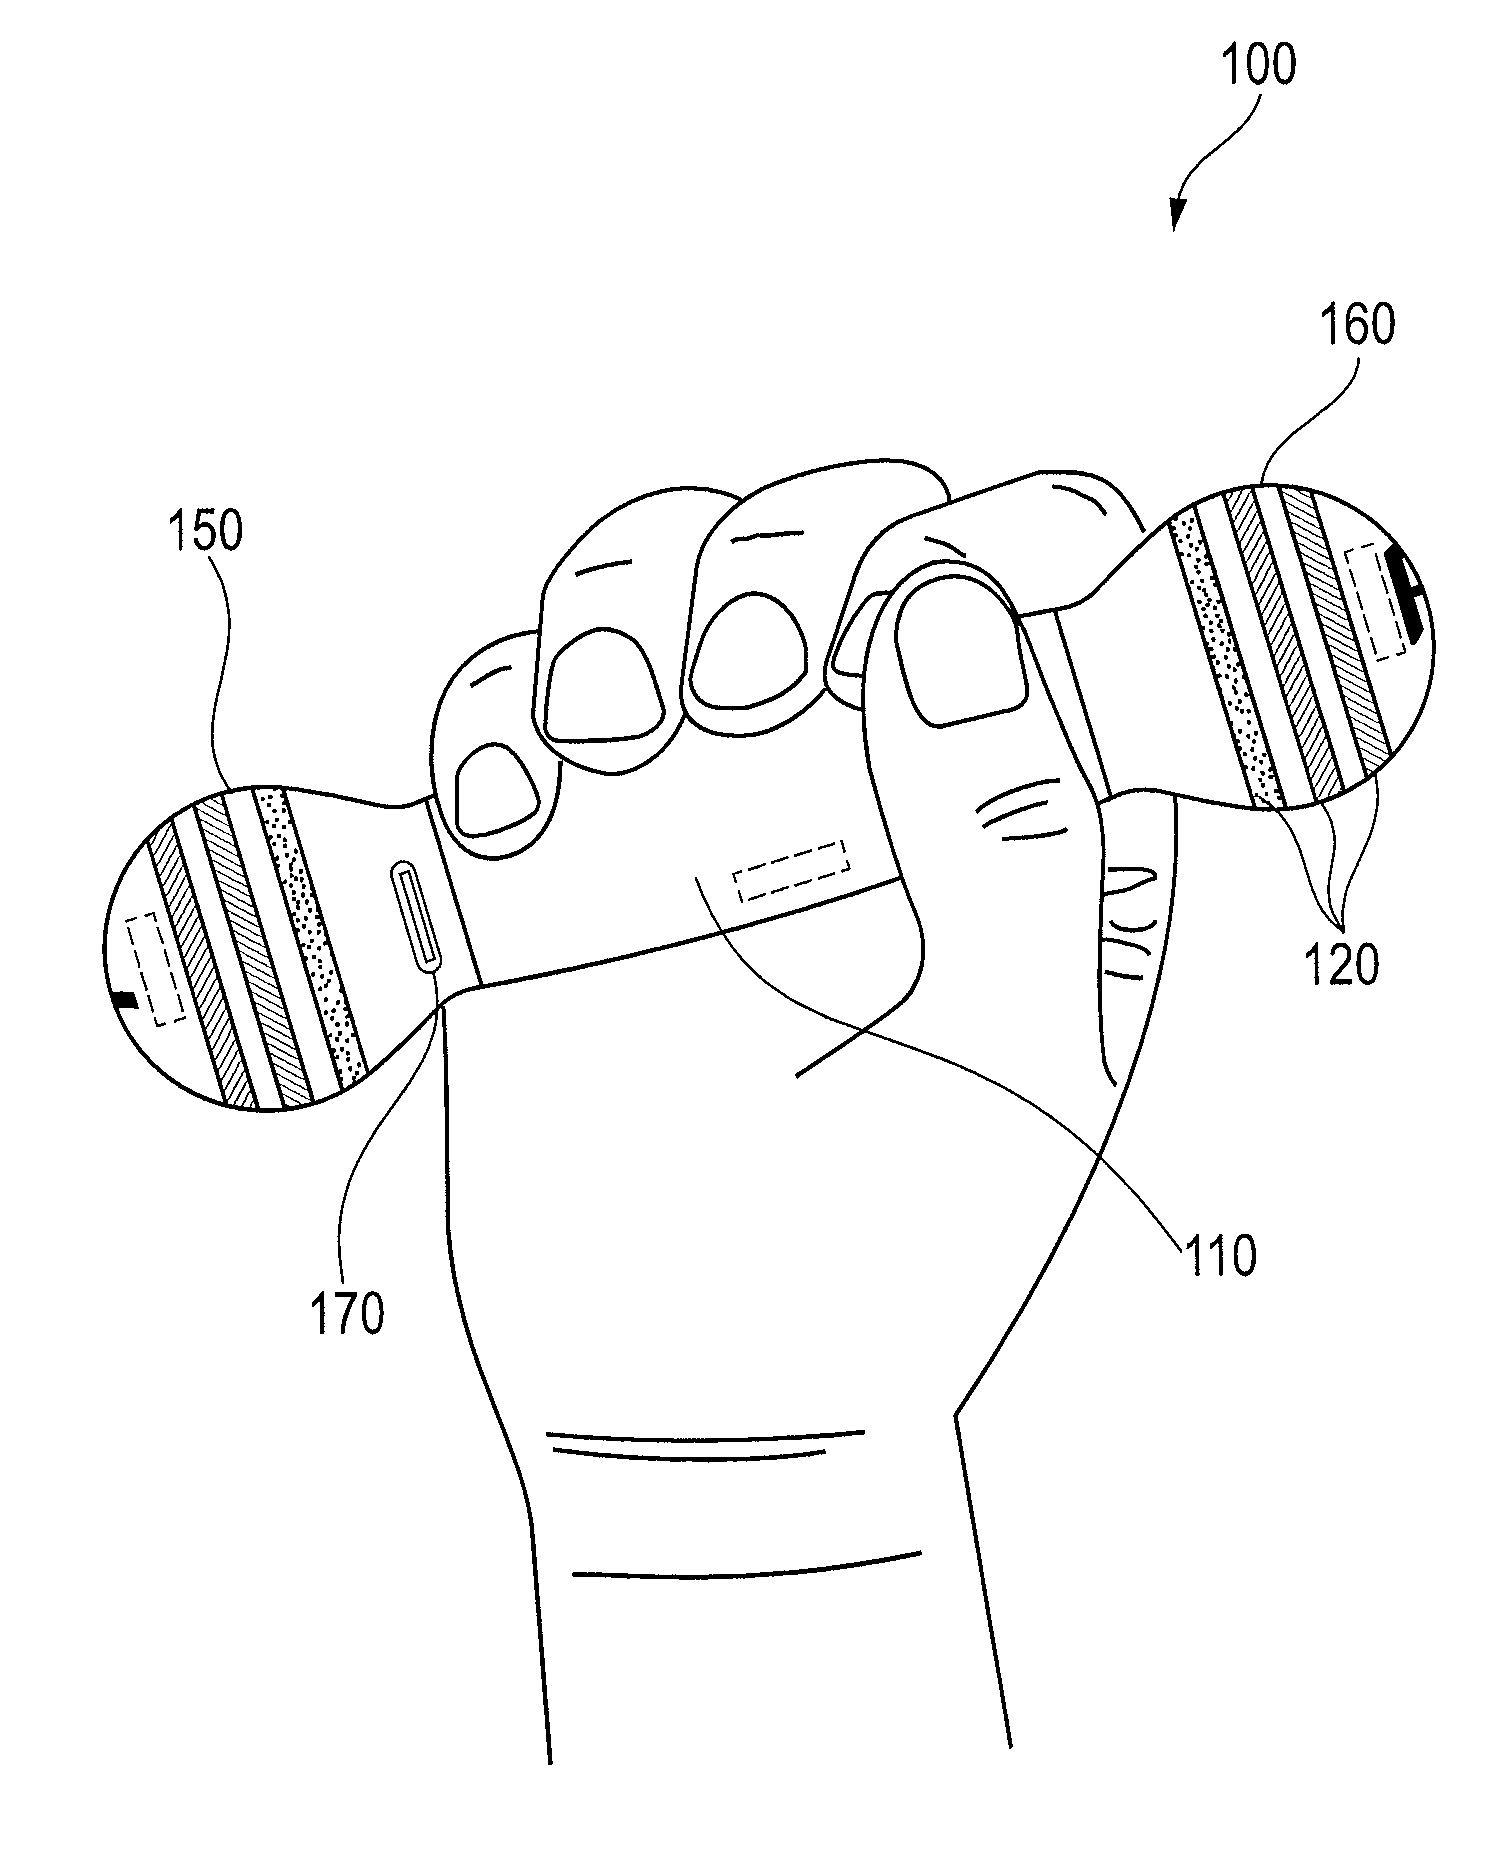 Digital instrument for use in physical therapy and method for administering physical therapy using same